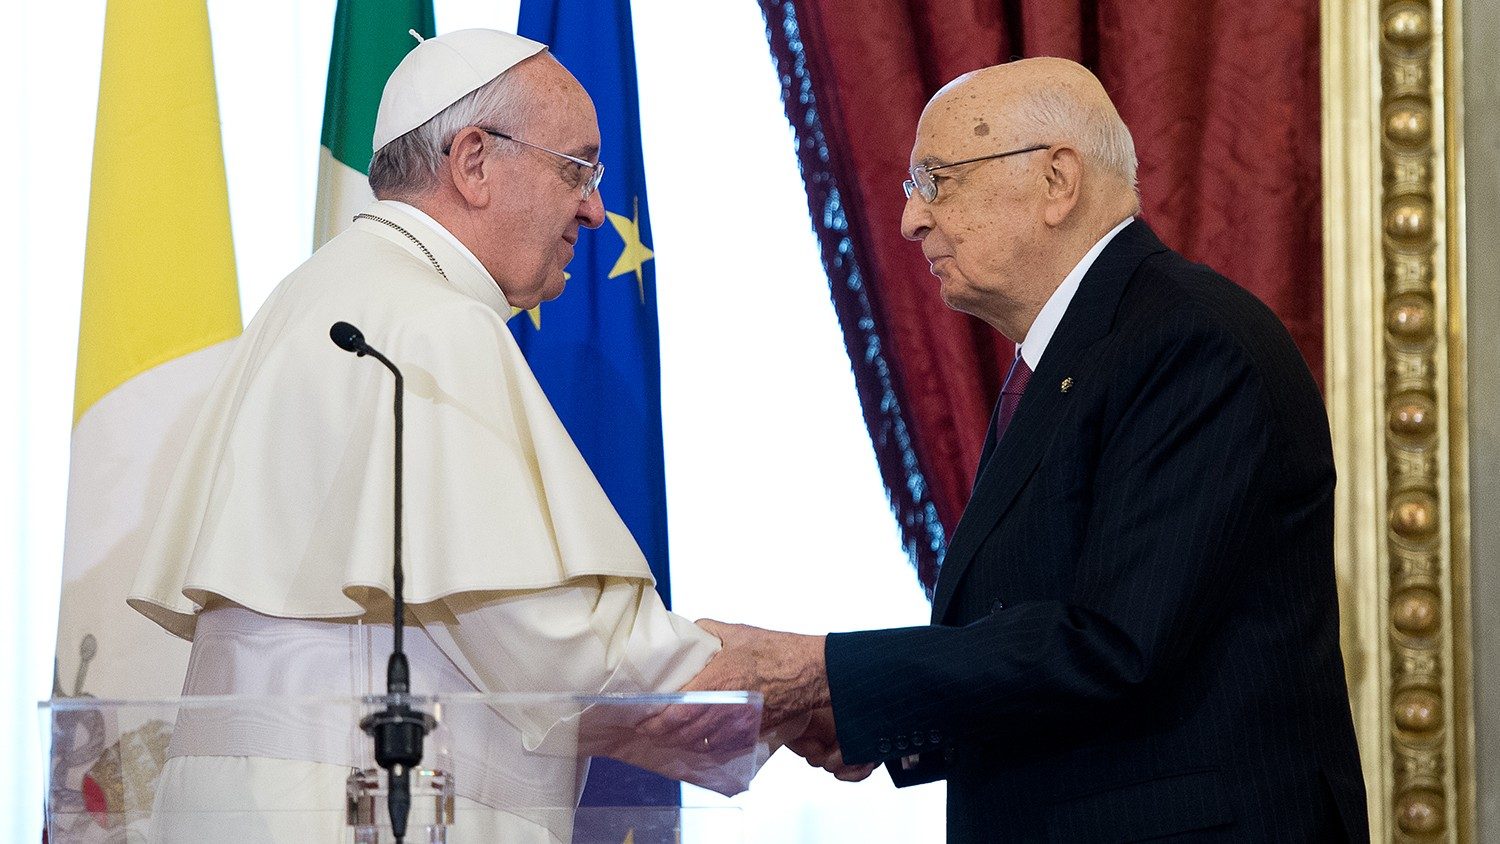 Prayers for Former Italian President Napolitano as Health Deteriorates, Pope Francis Appeals for Support